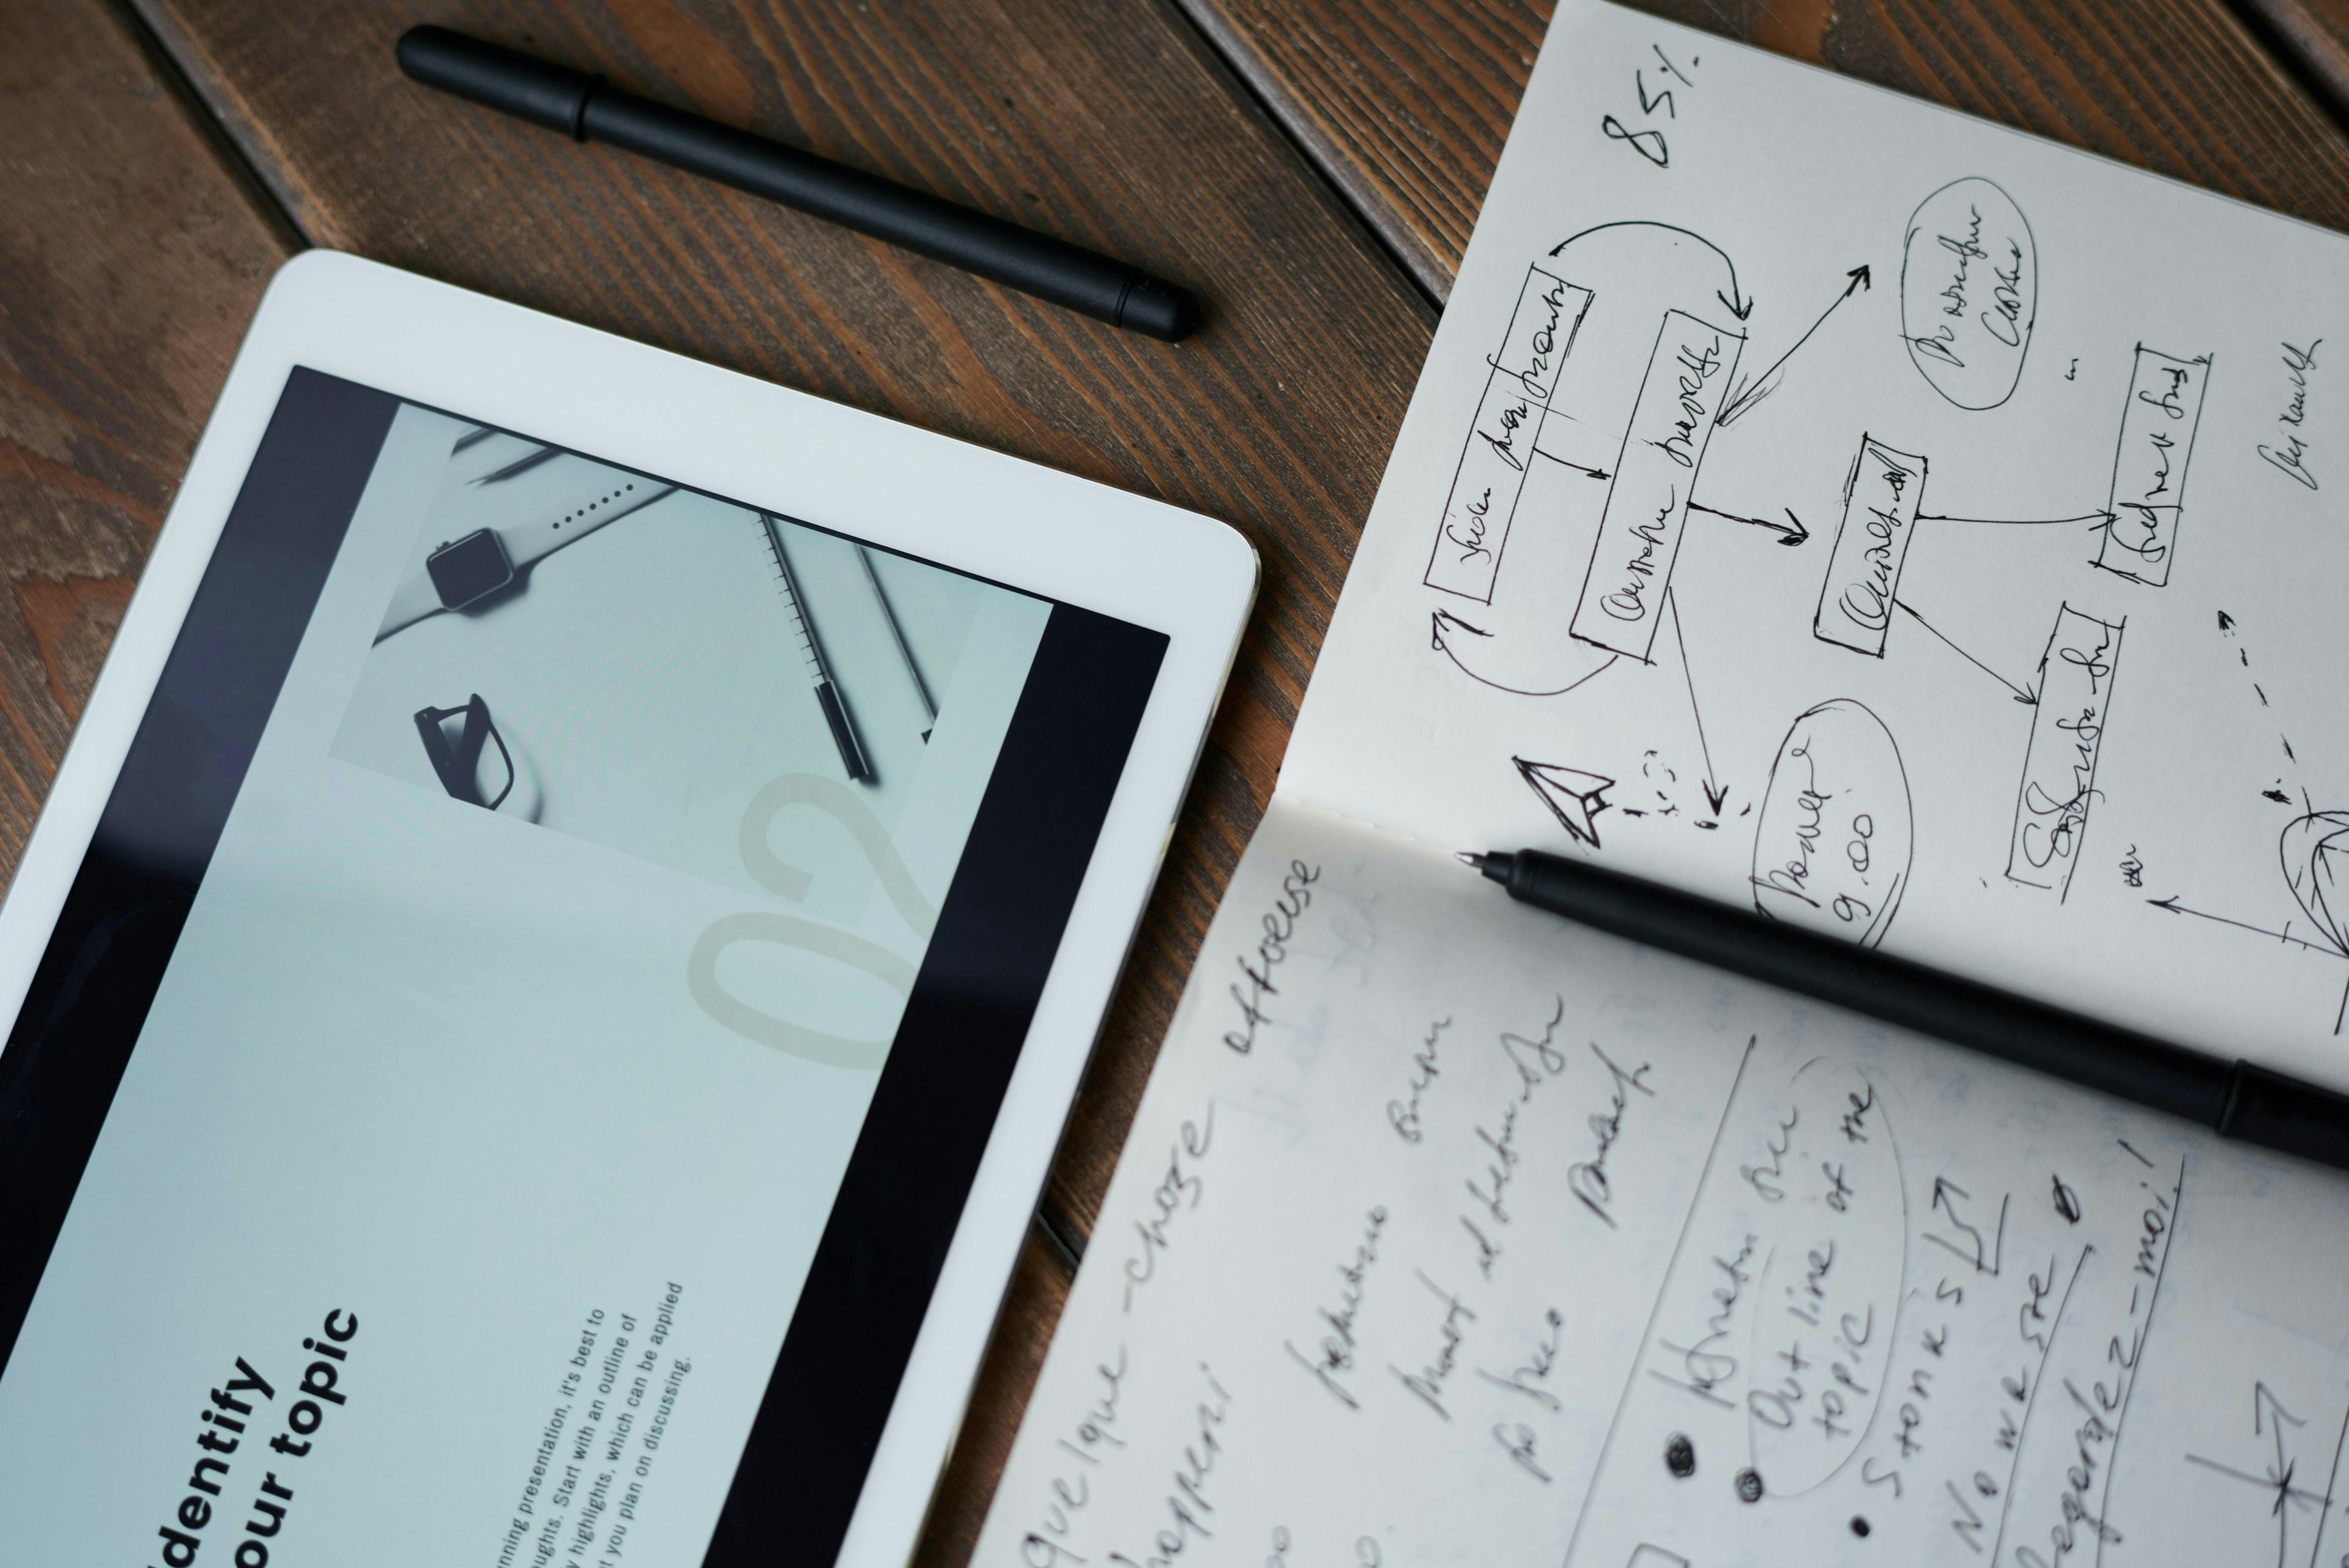 Tablet displays a presentation while a notebook with handwritten notes and diagrams lies beside it on a wooden table. Two black pens are placed near the tablet and notebook.